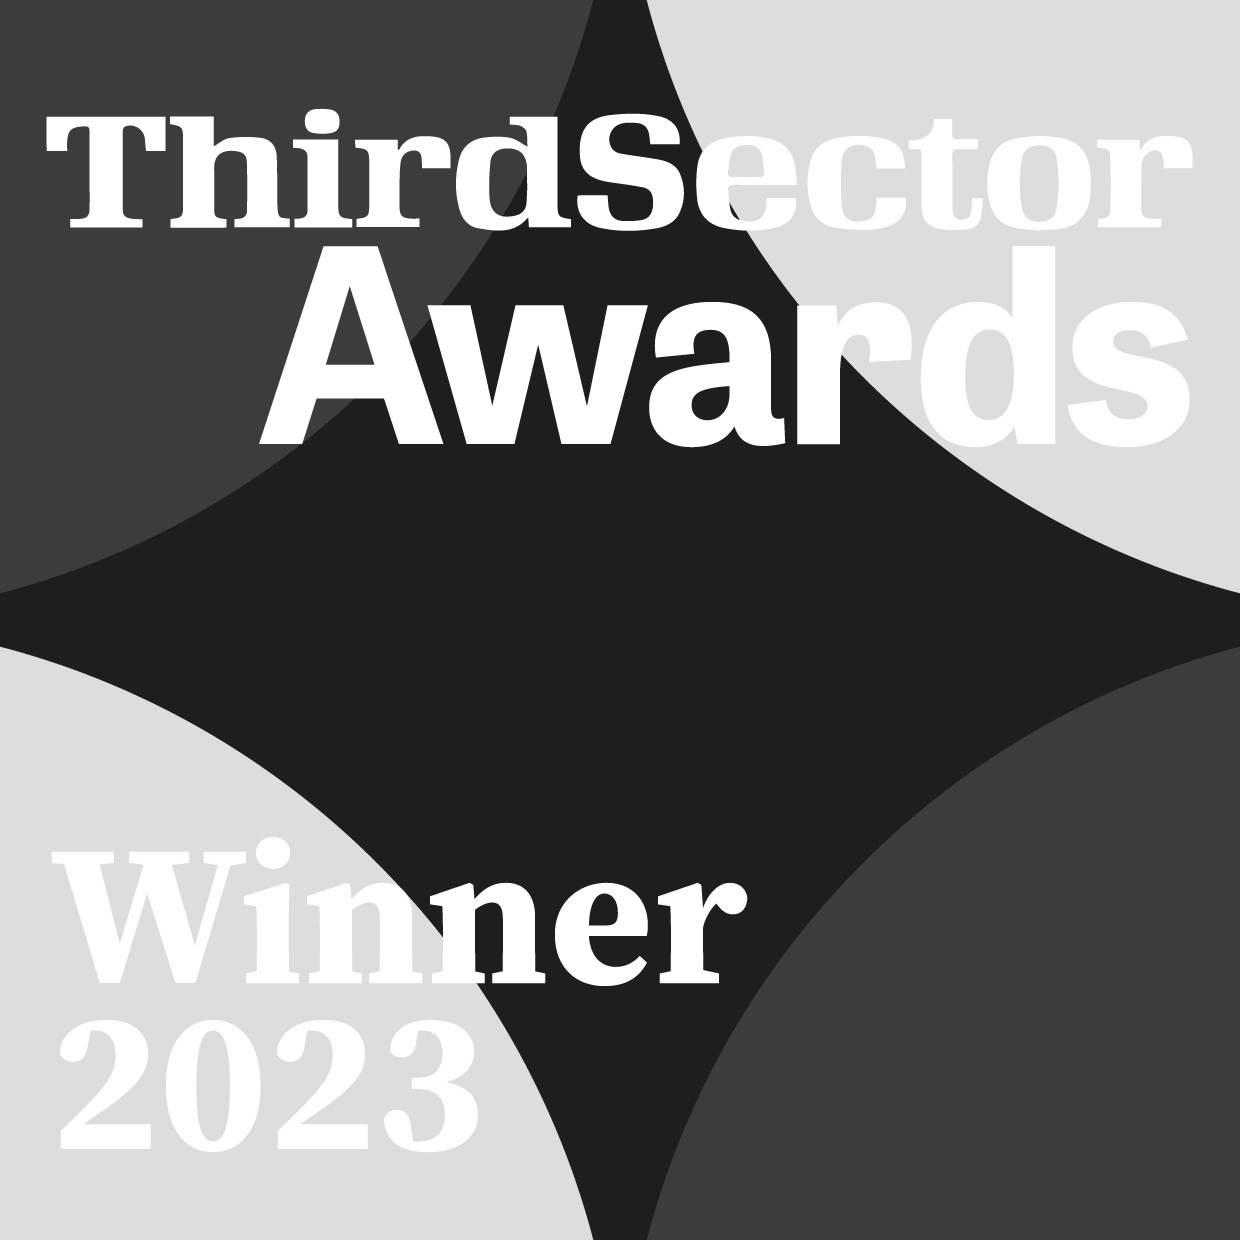 Hampshire and Isle of Wight Air Ambulance are winners of the Fundraising Team of the Year at the Third Sector Awards 2023